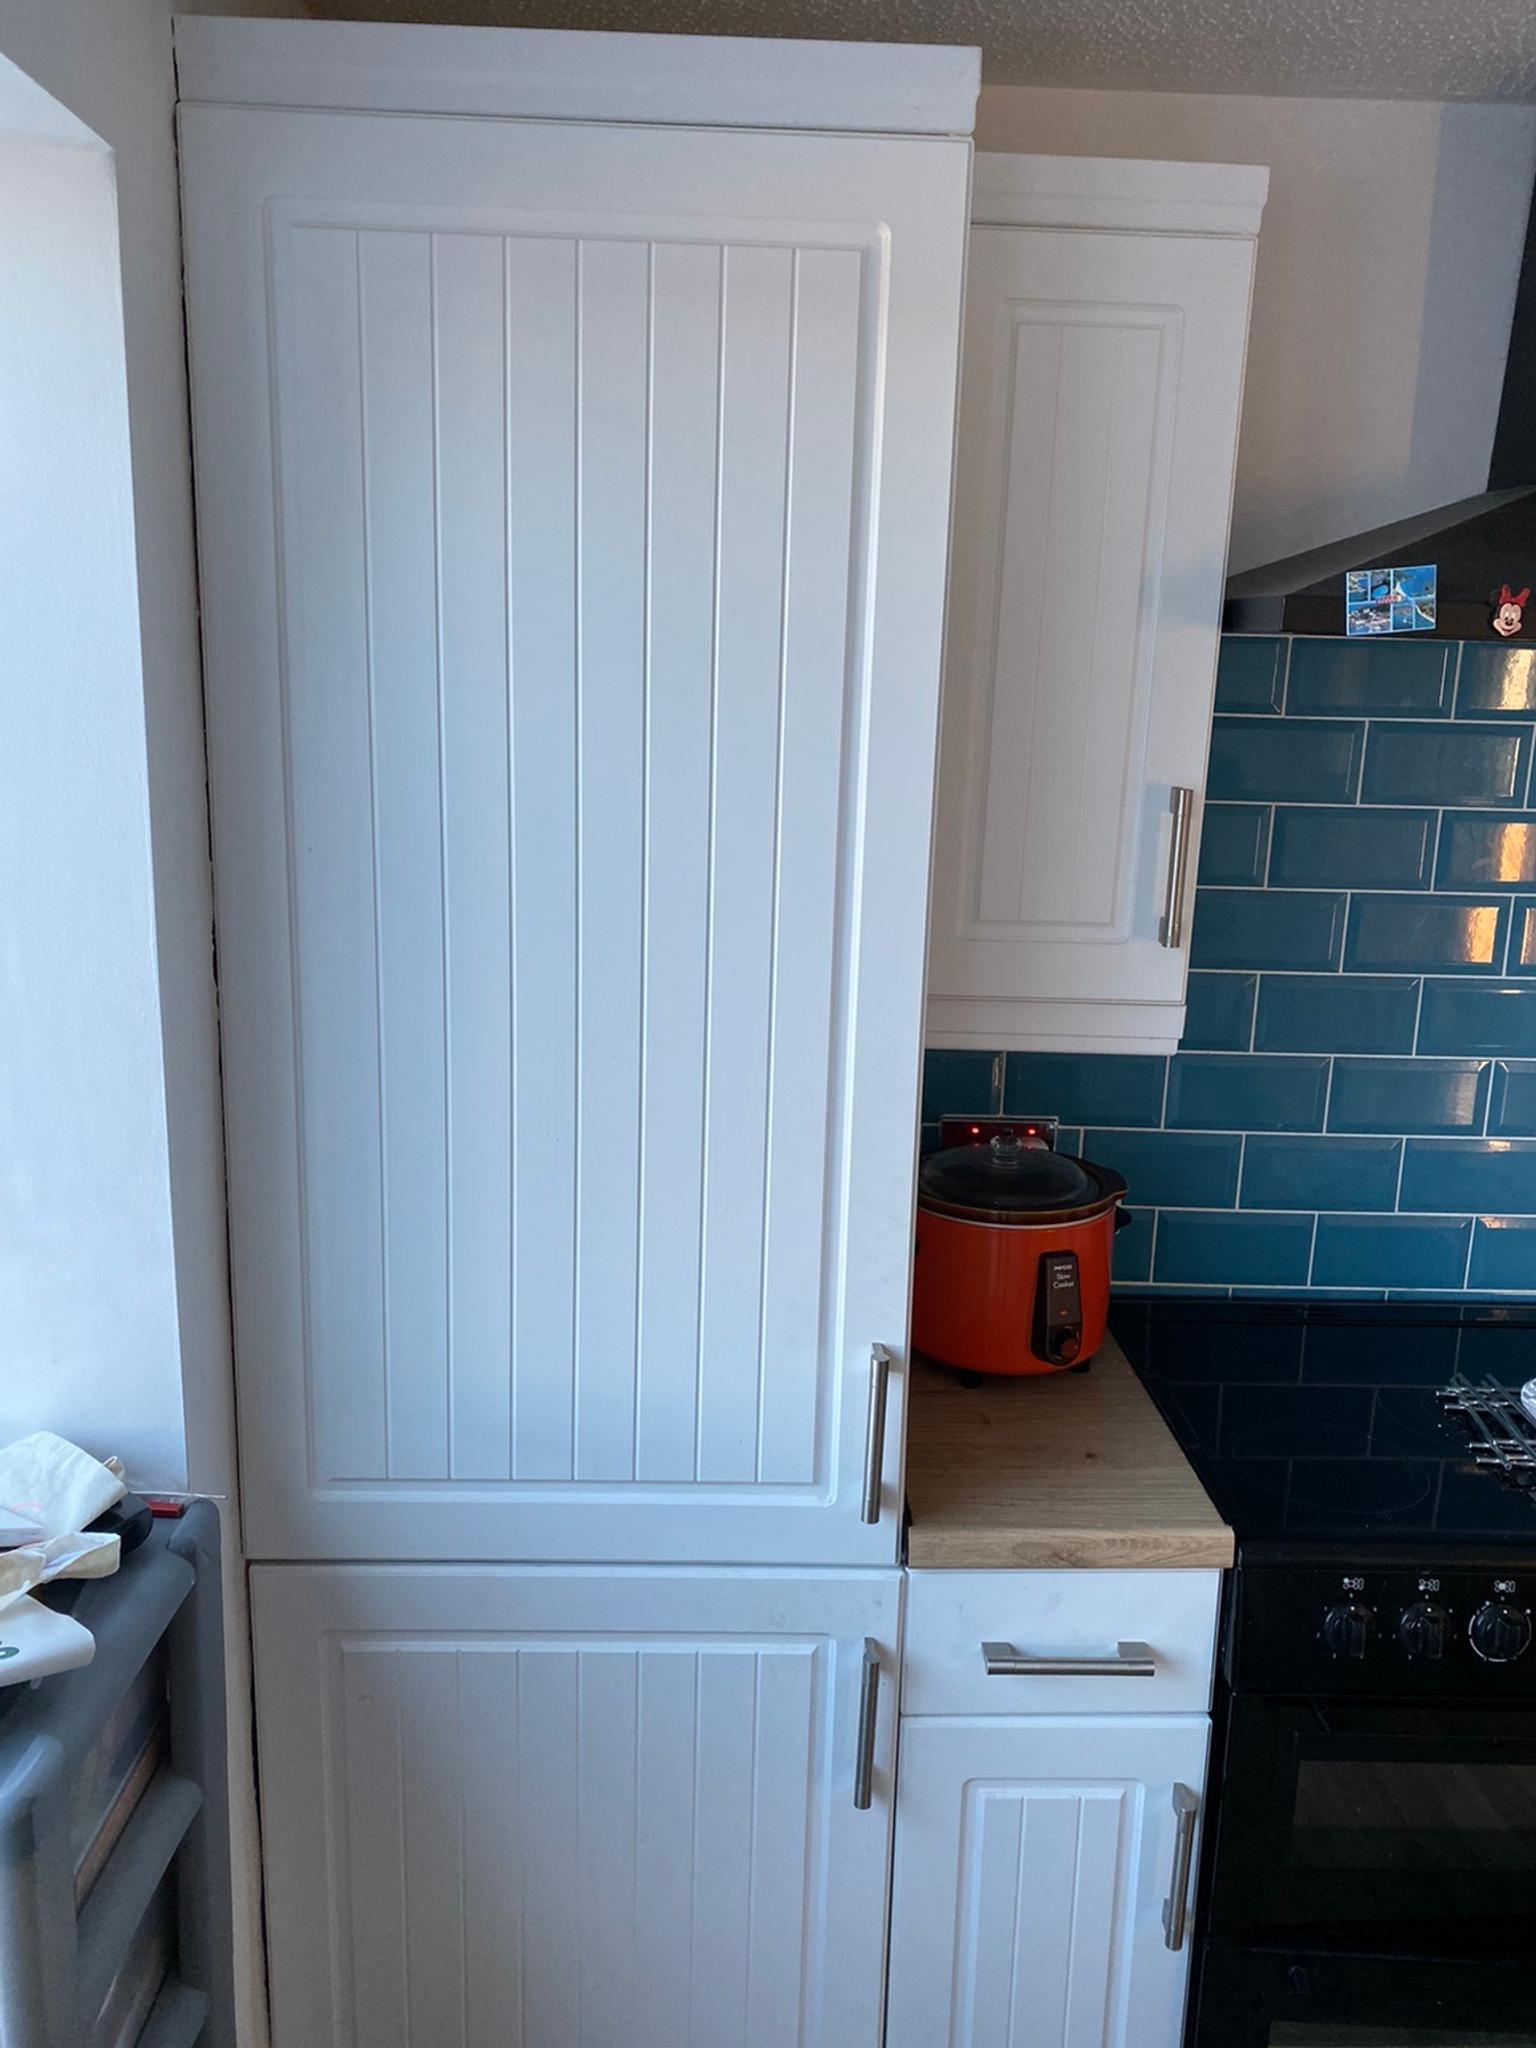 Kitchen Cabinet Doors In Bs22 Worle For 50 00 For Sale Shpock